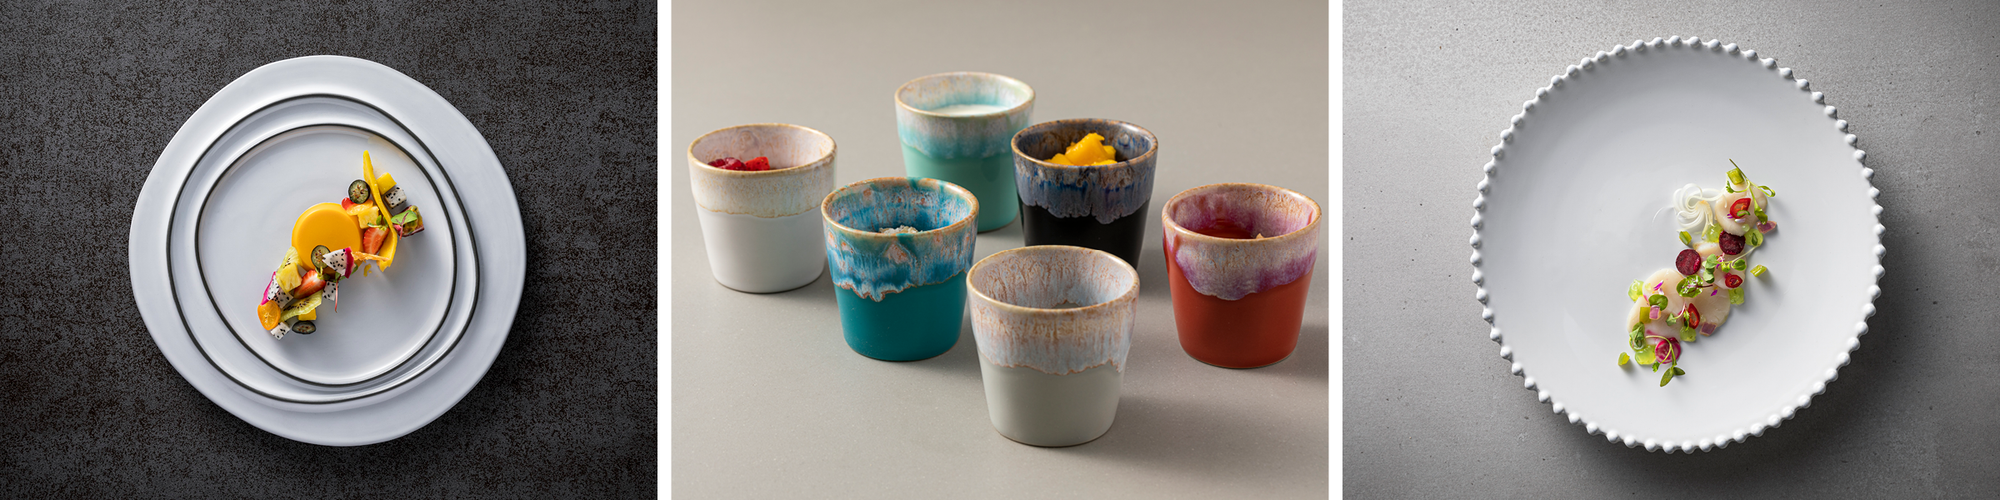 Discover the Artistry of Costa Nova: Where Life, Family, Friends, and Fine Food Inspire Stunning Stoneware Creations